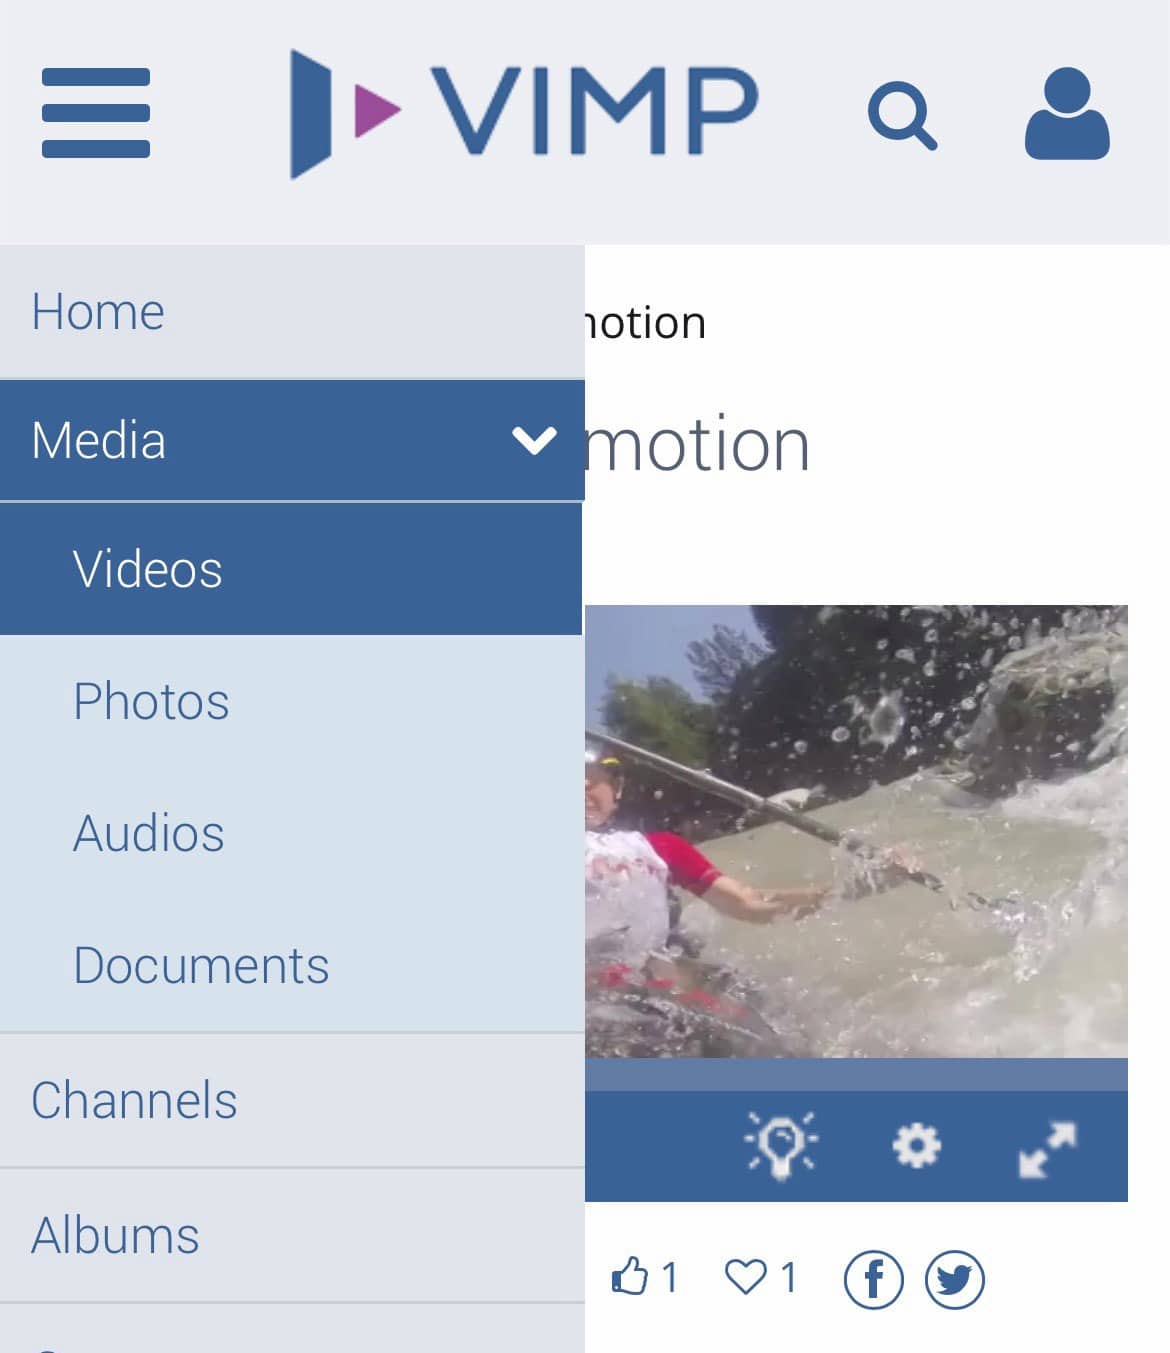 The most important innovations in VIMP 5.2